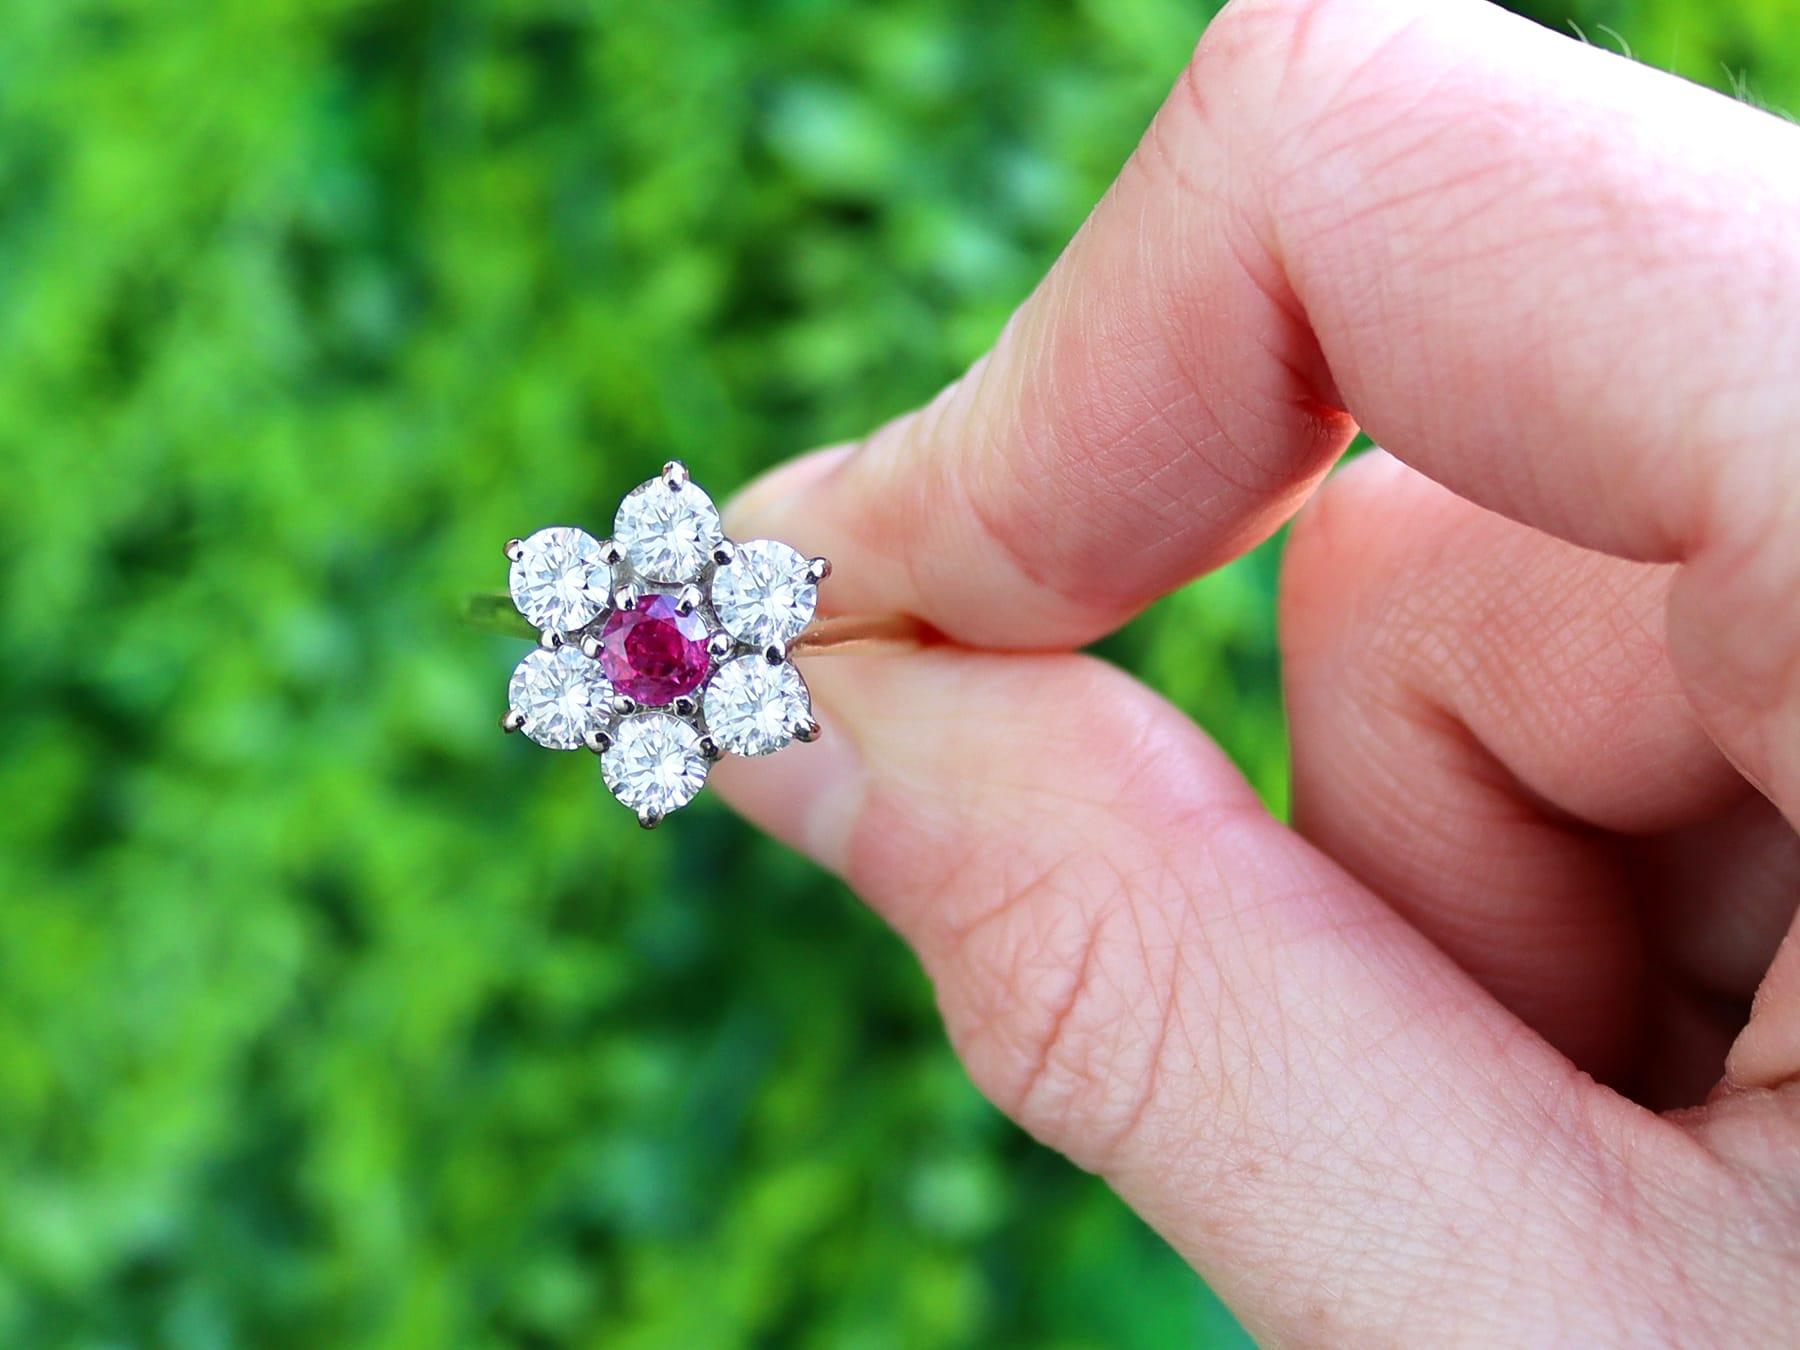 A stunning, fine and impressive vintage English 0.38 carat ruby and 2.46 carat diamond, 18 karat yellow gold flower cluster ring; part of our vintage jewellery and estate jewelry collections.

This stunning, fine and impressive vintage ruby ring has